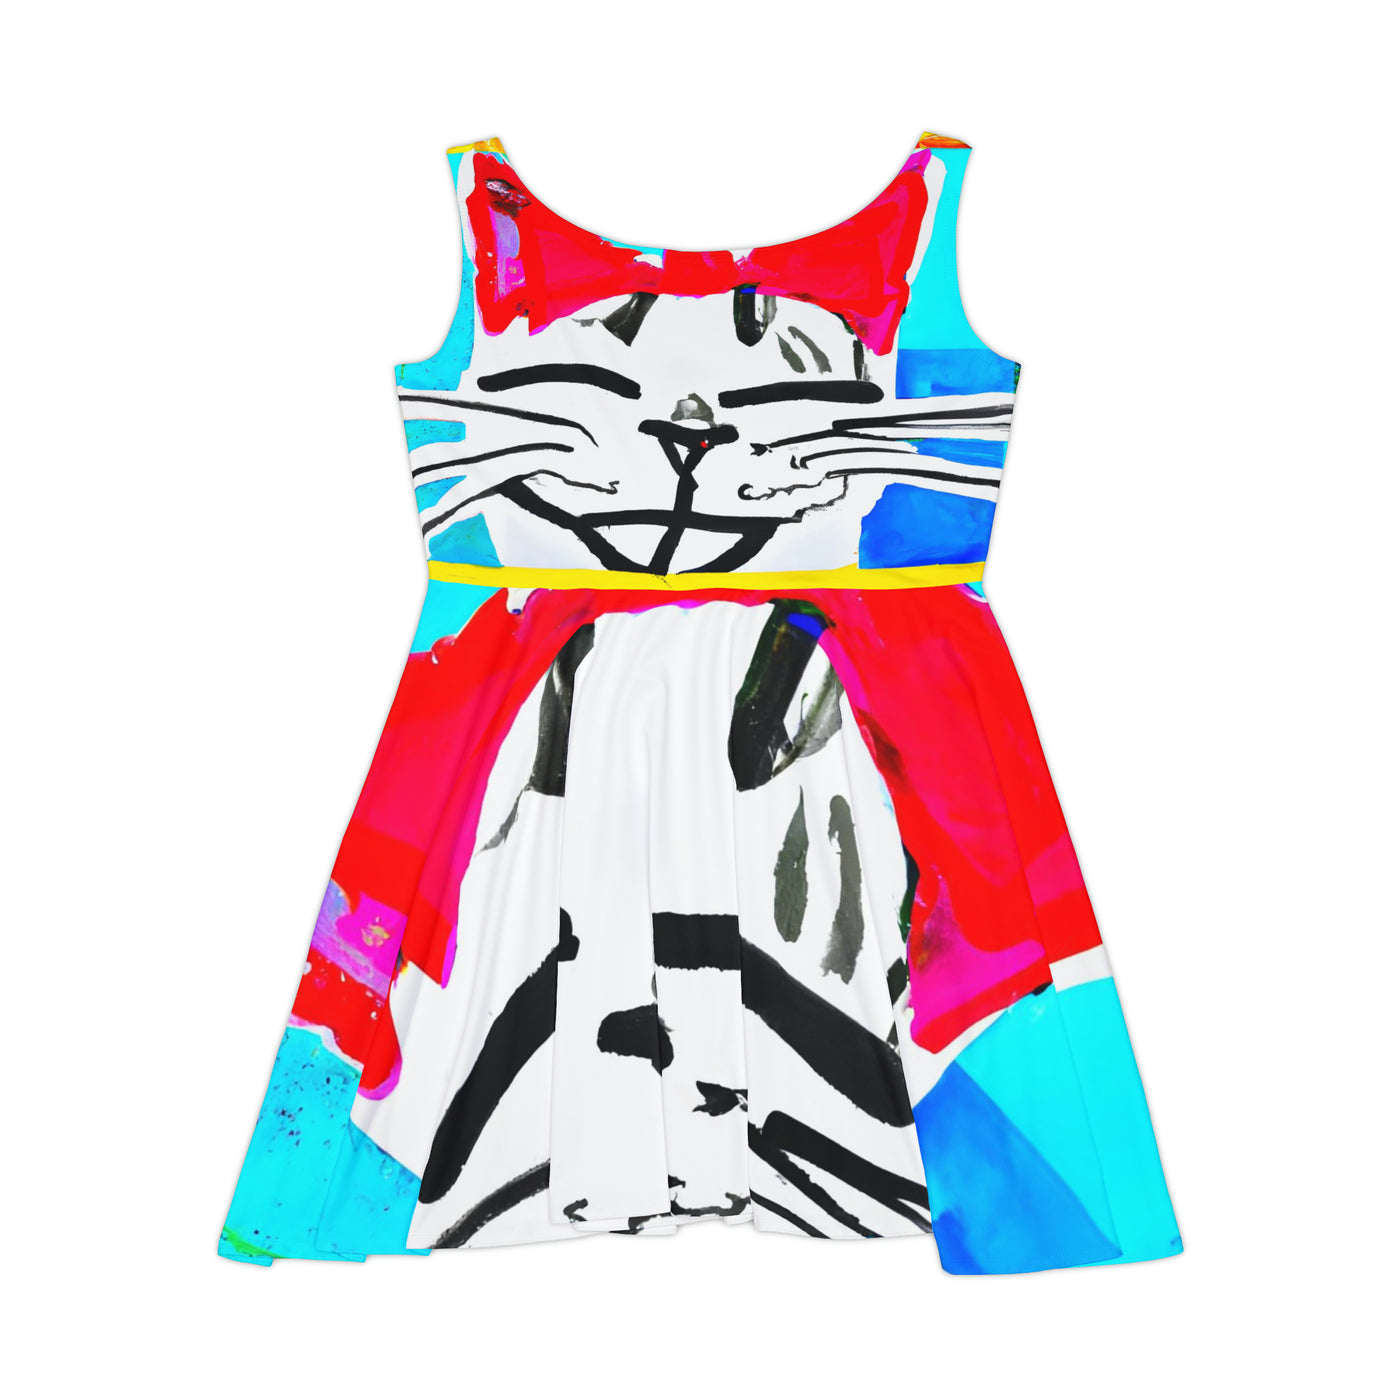 "Purrfect Pals: A Celebration of Happy Cats" Women's Skater Dress